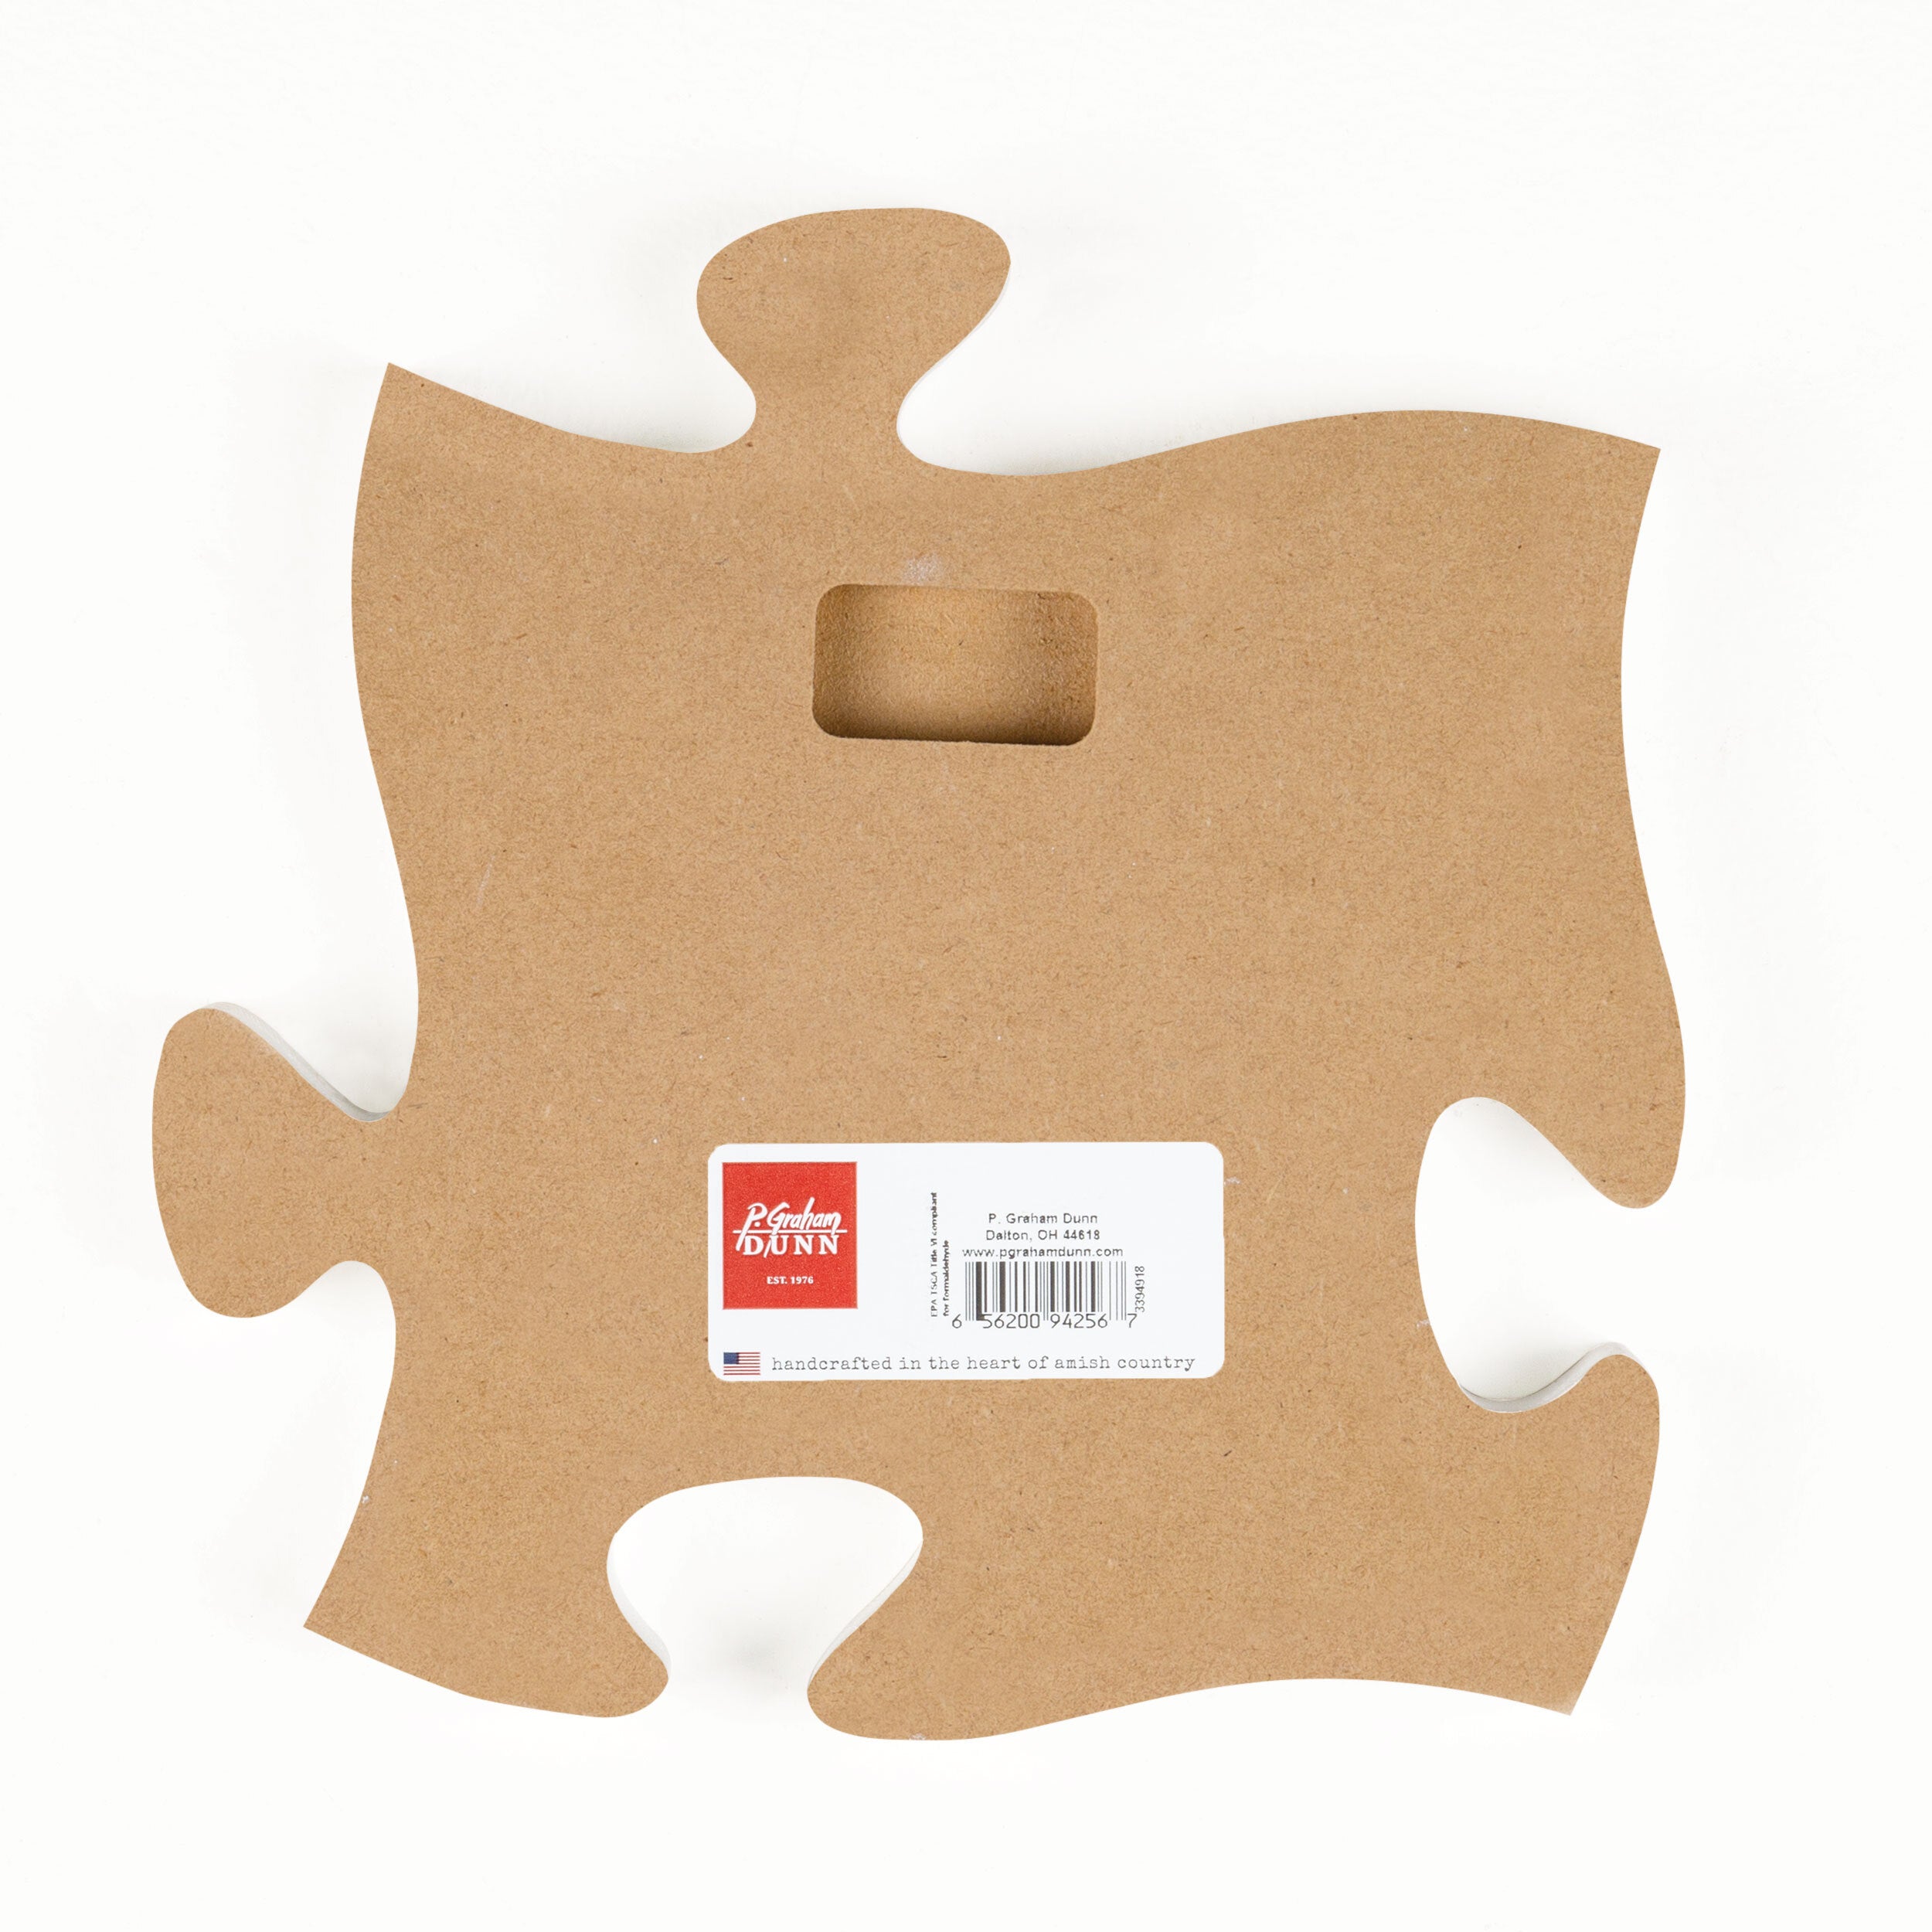 **Love Laughter And Happily Ever After Mini Puzzle Piece Décor